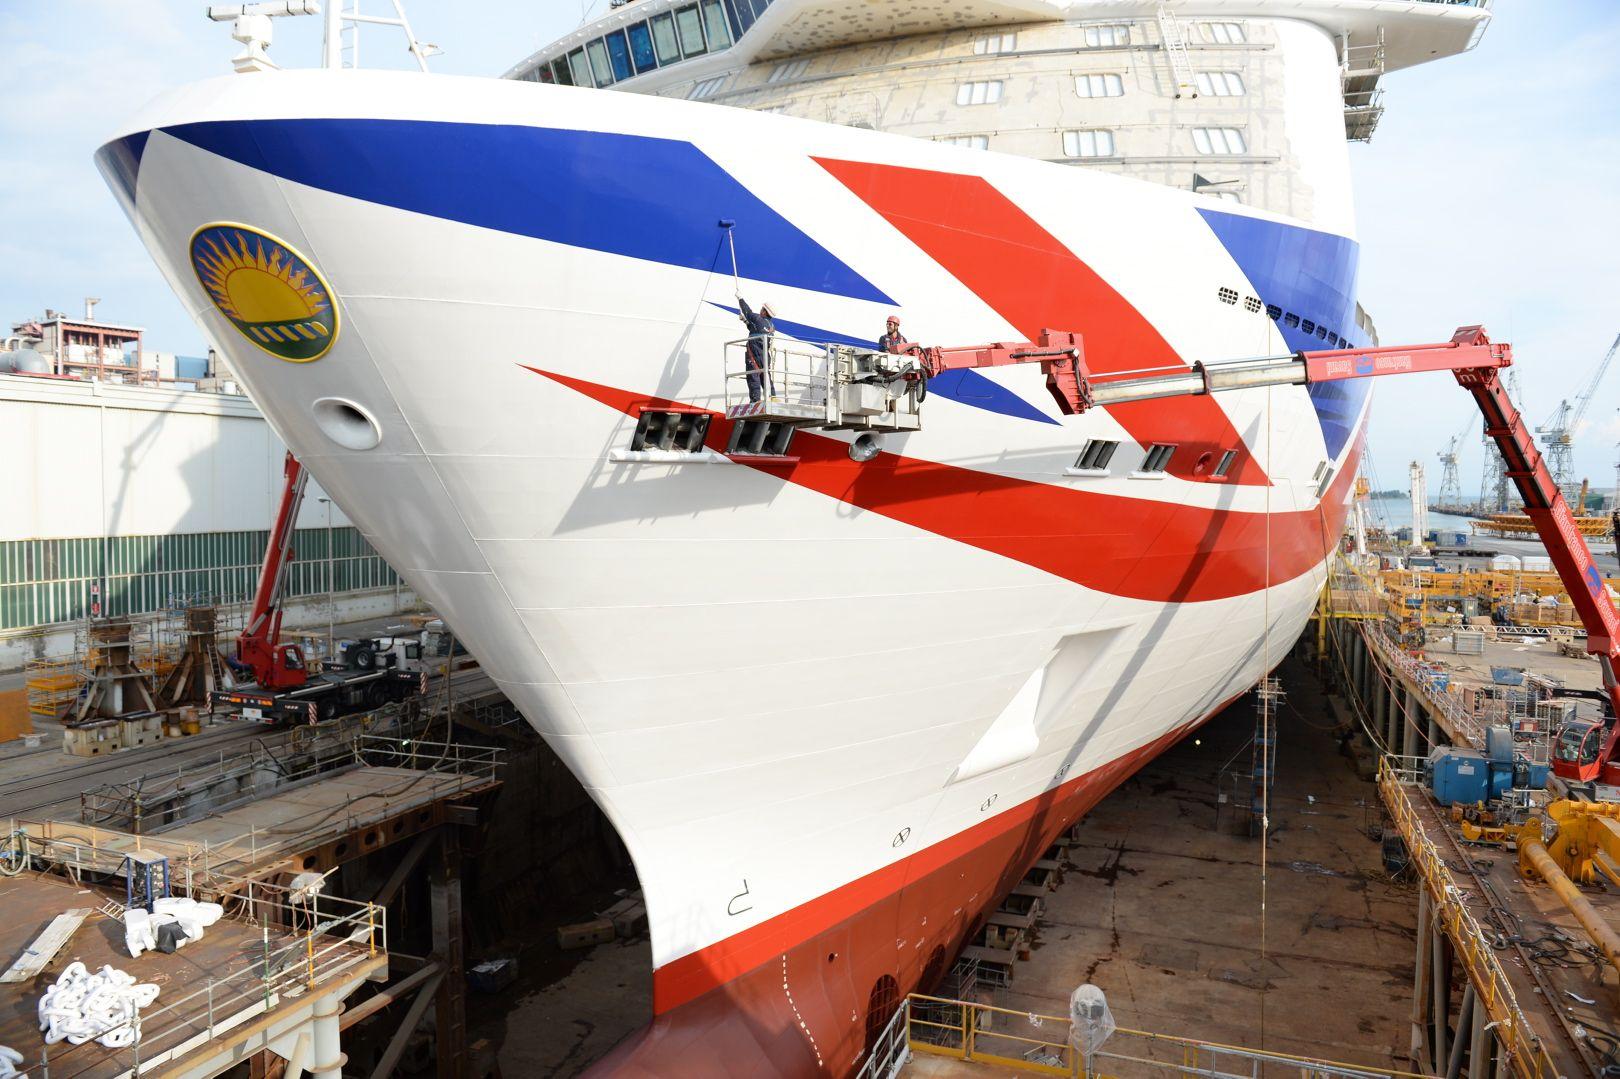 Red and White Ship Logo - P&O Cruises Britannia is Red, White And Blue | CruiseMiss Cruise Blog